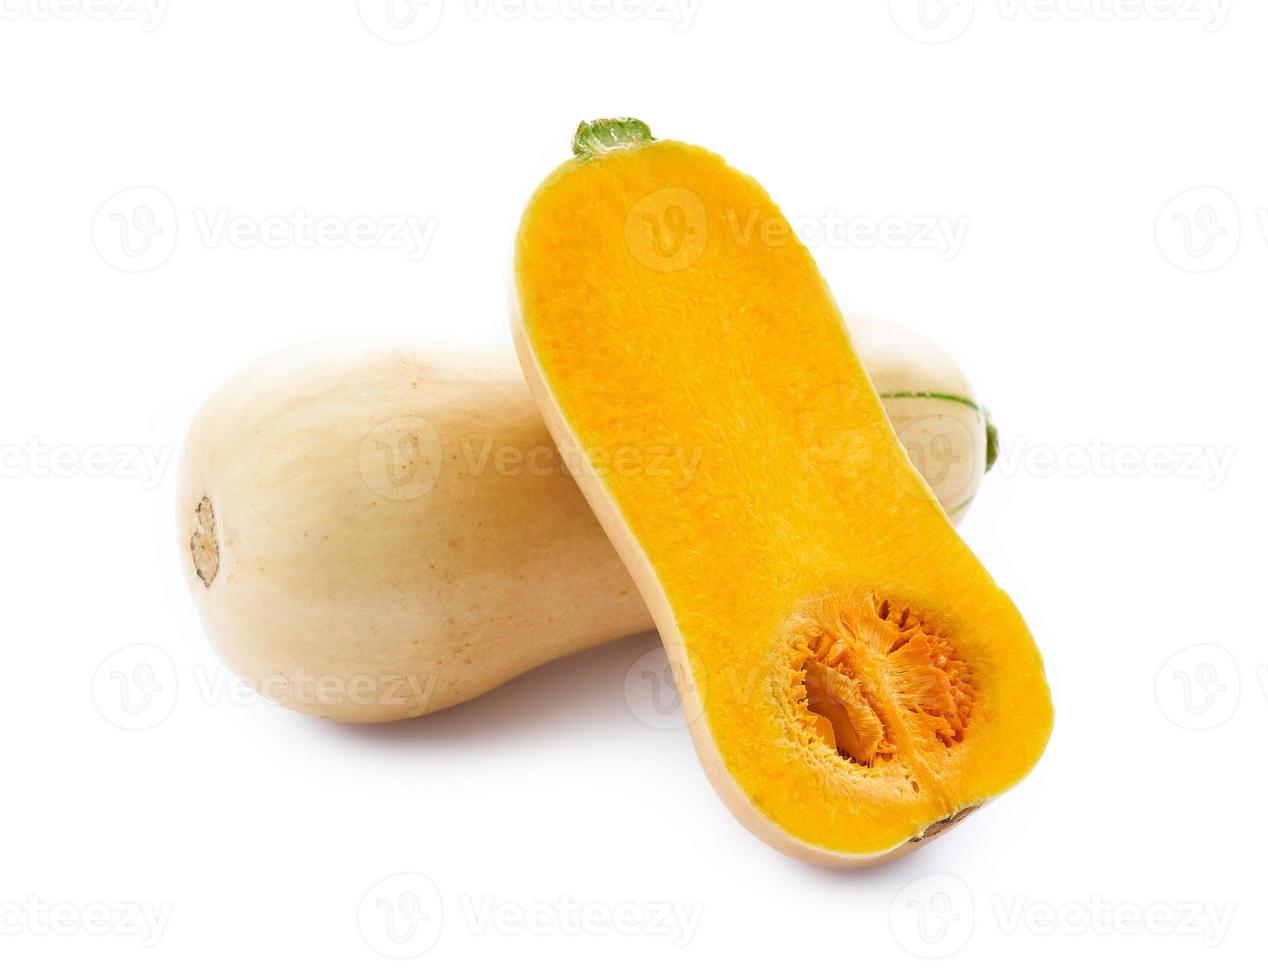 butternut squash or butternut pumpkin or gramma isolated on white background. winter autumn vegetable food photo